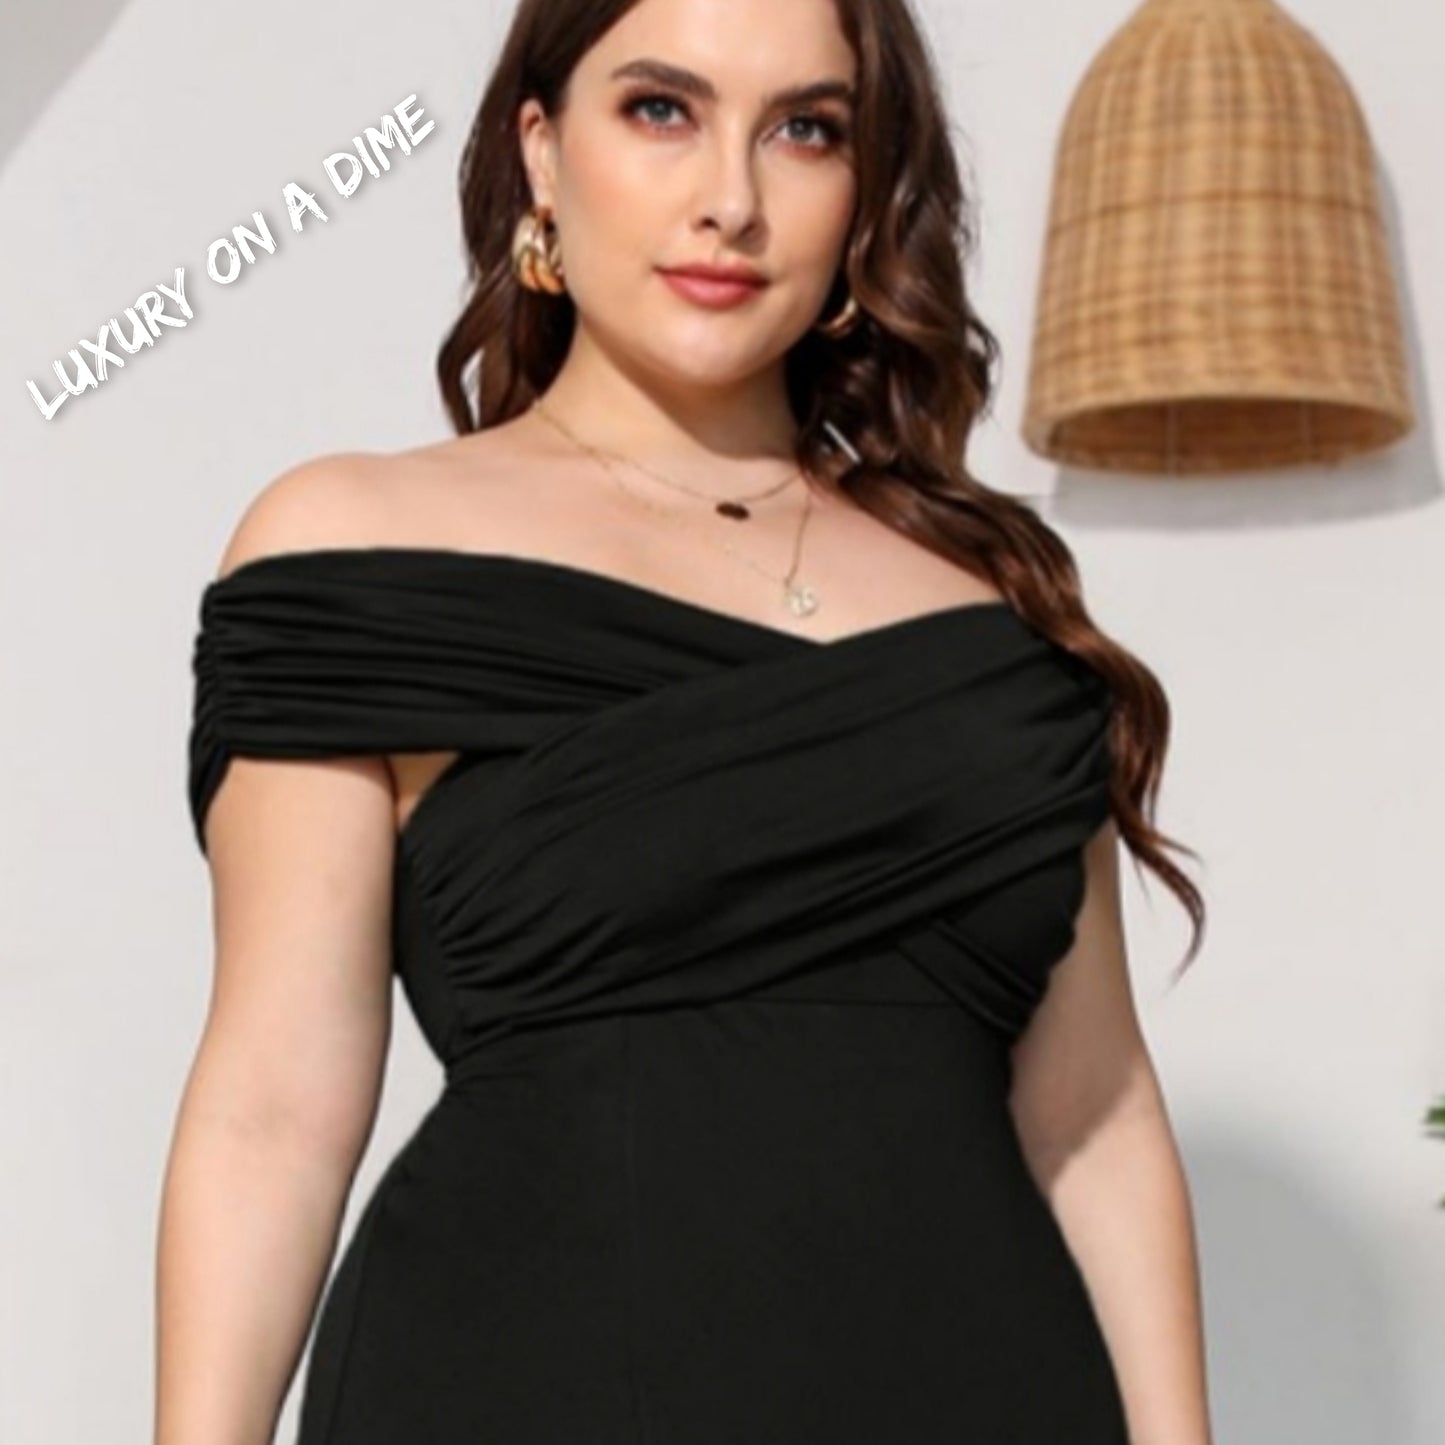 Wrap Crossover Bodice Formal Off-Shoulder High Slit Maxi Party Dress (Plus Size Only)